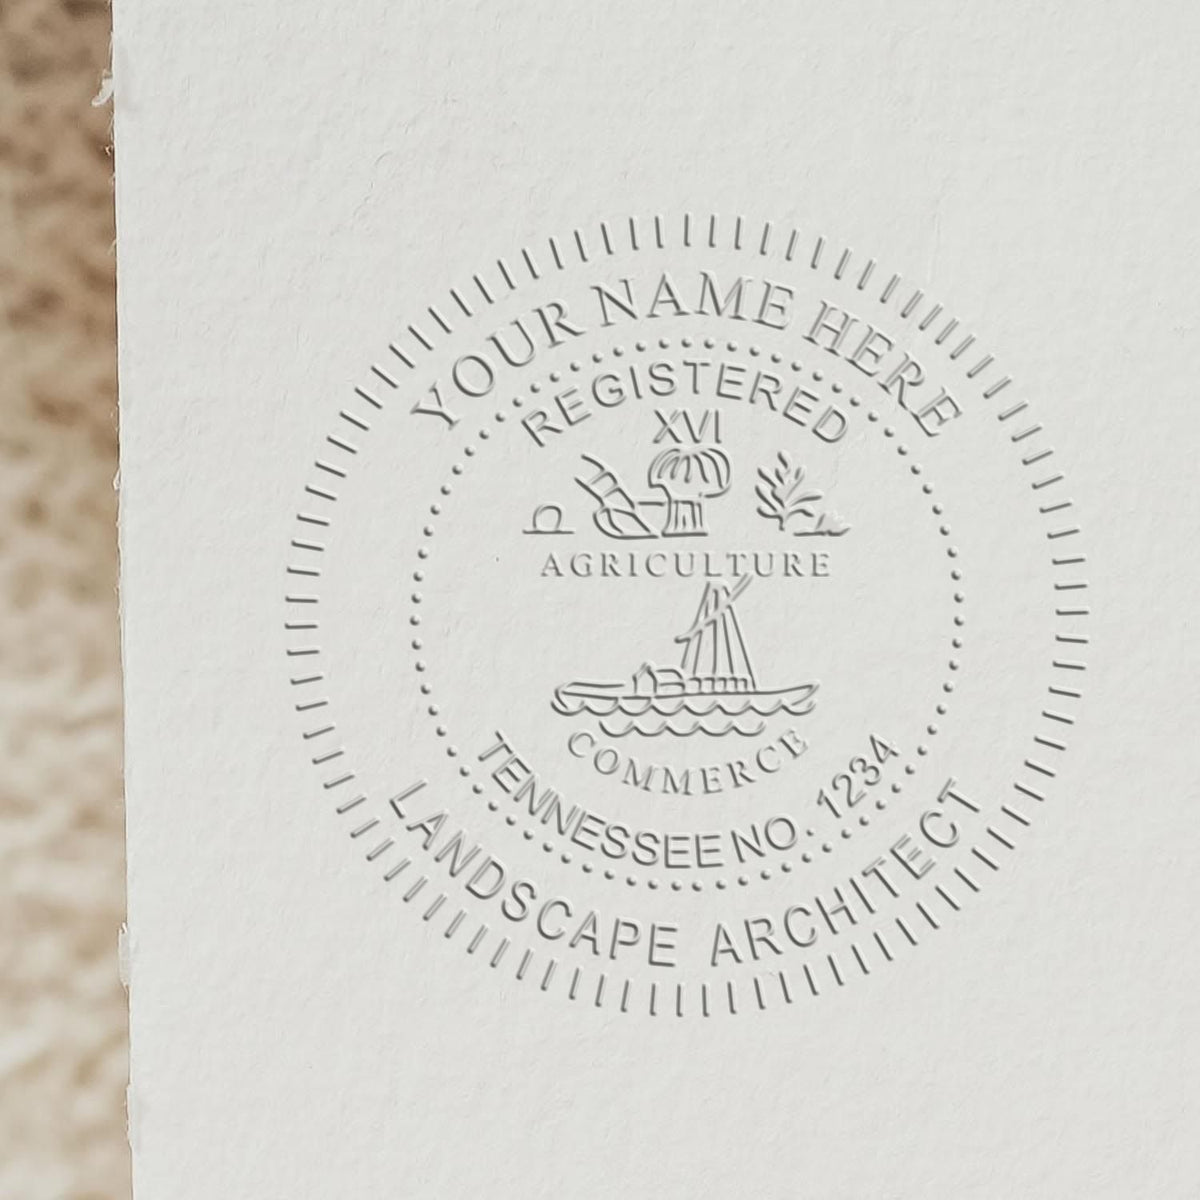 A photograph of the Hybrid Tennessee Landscape Architect Seal stamp impression reveals a vivid, professional image of the on paper.